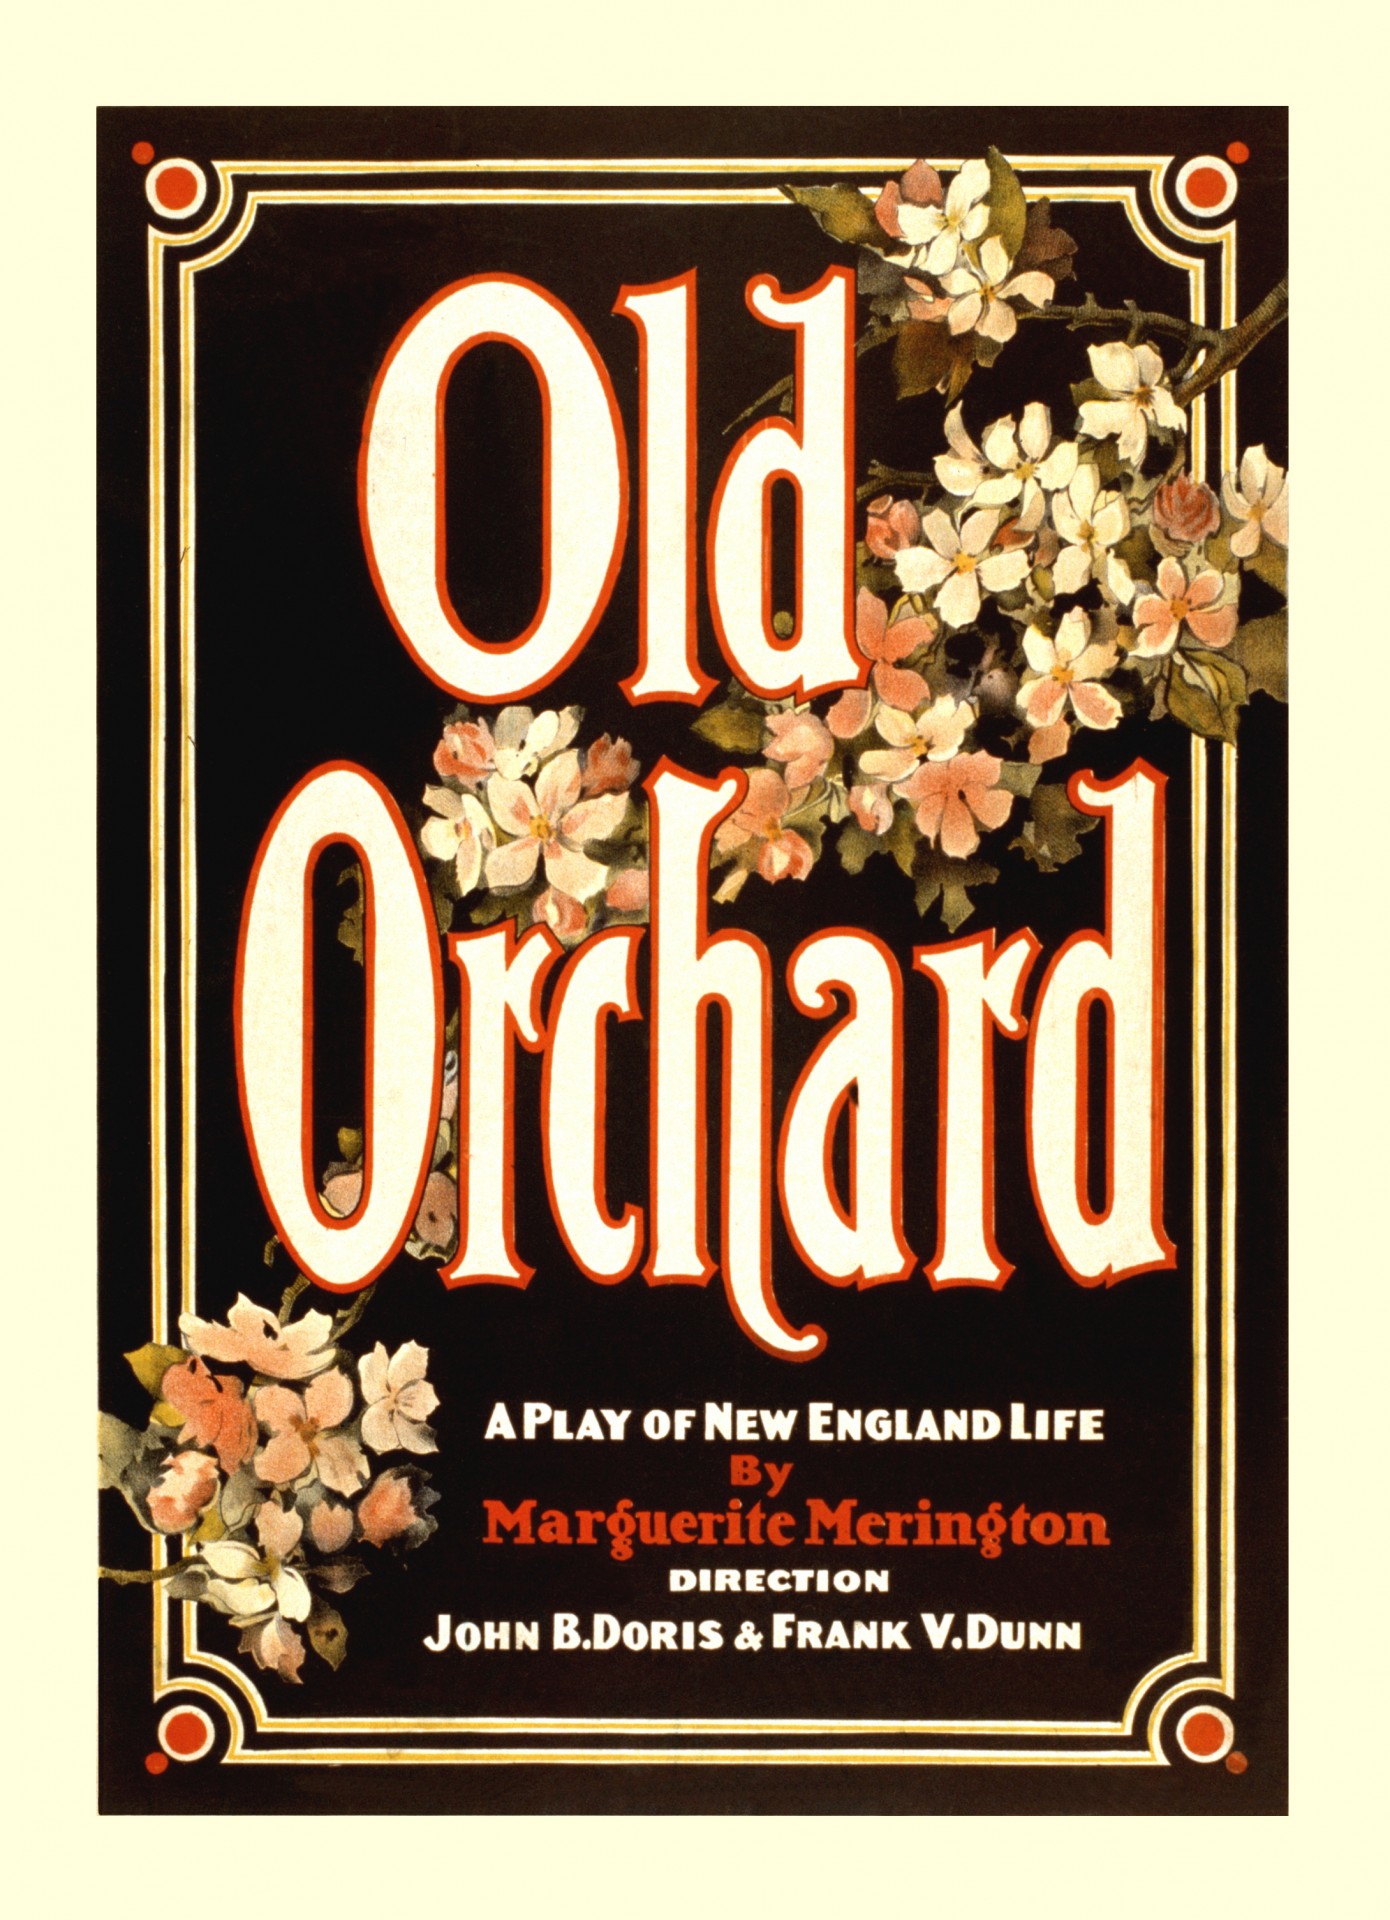 Cleaned up vintage old orchard play poster.